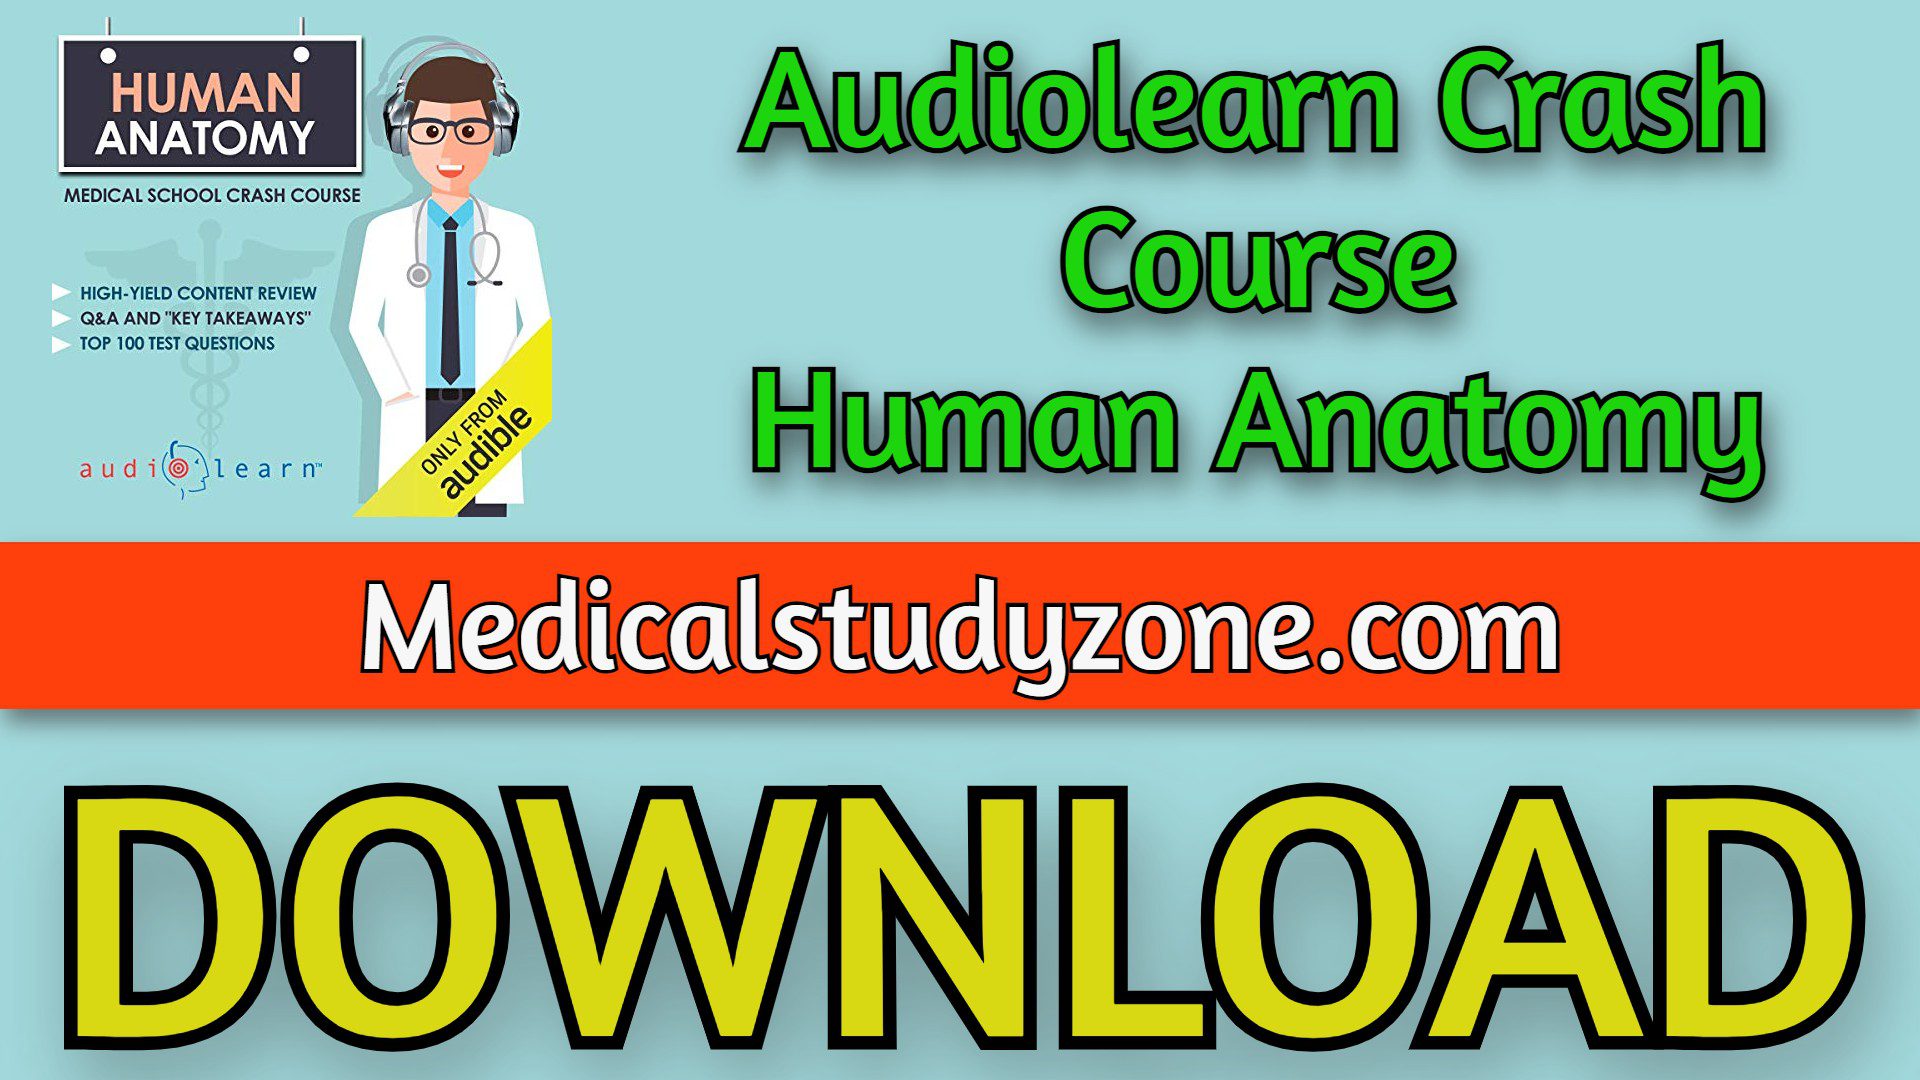 Audiolearn Crash Course Human Anatomy 2021 Free Download